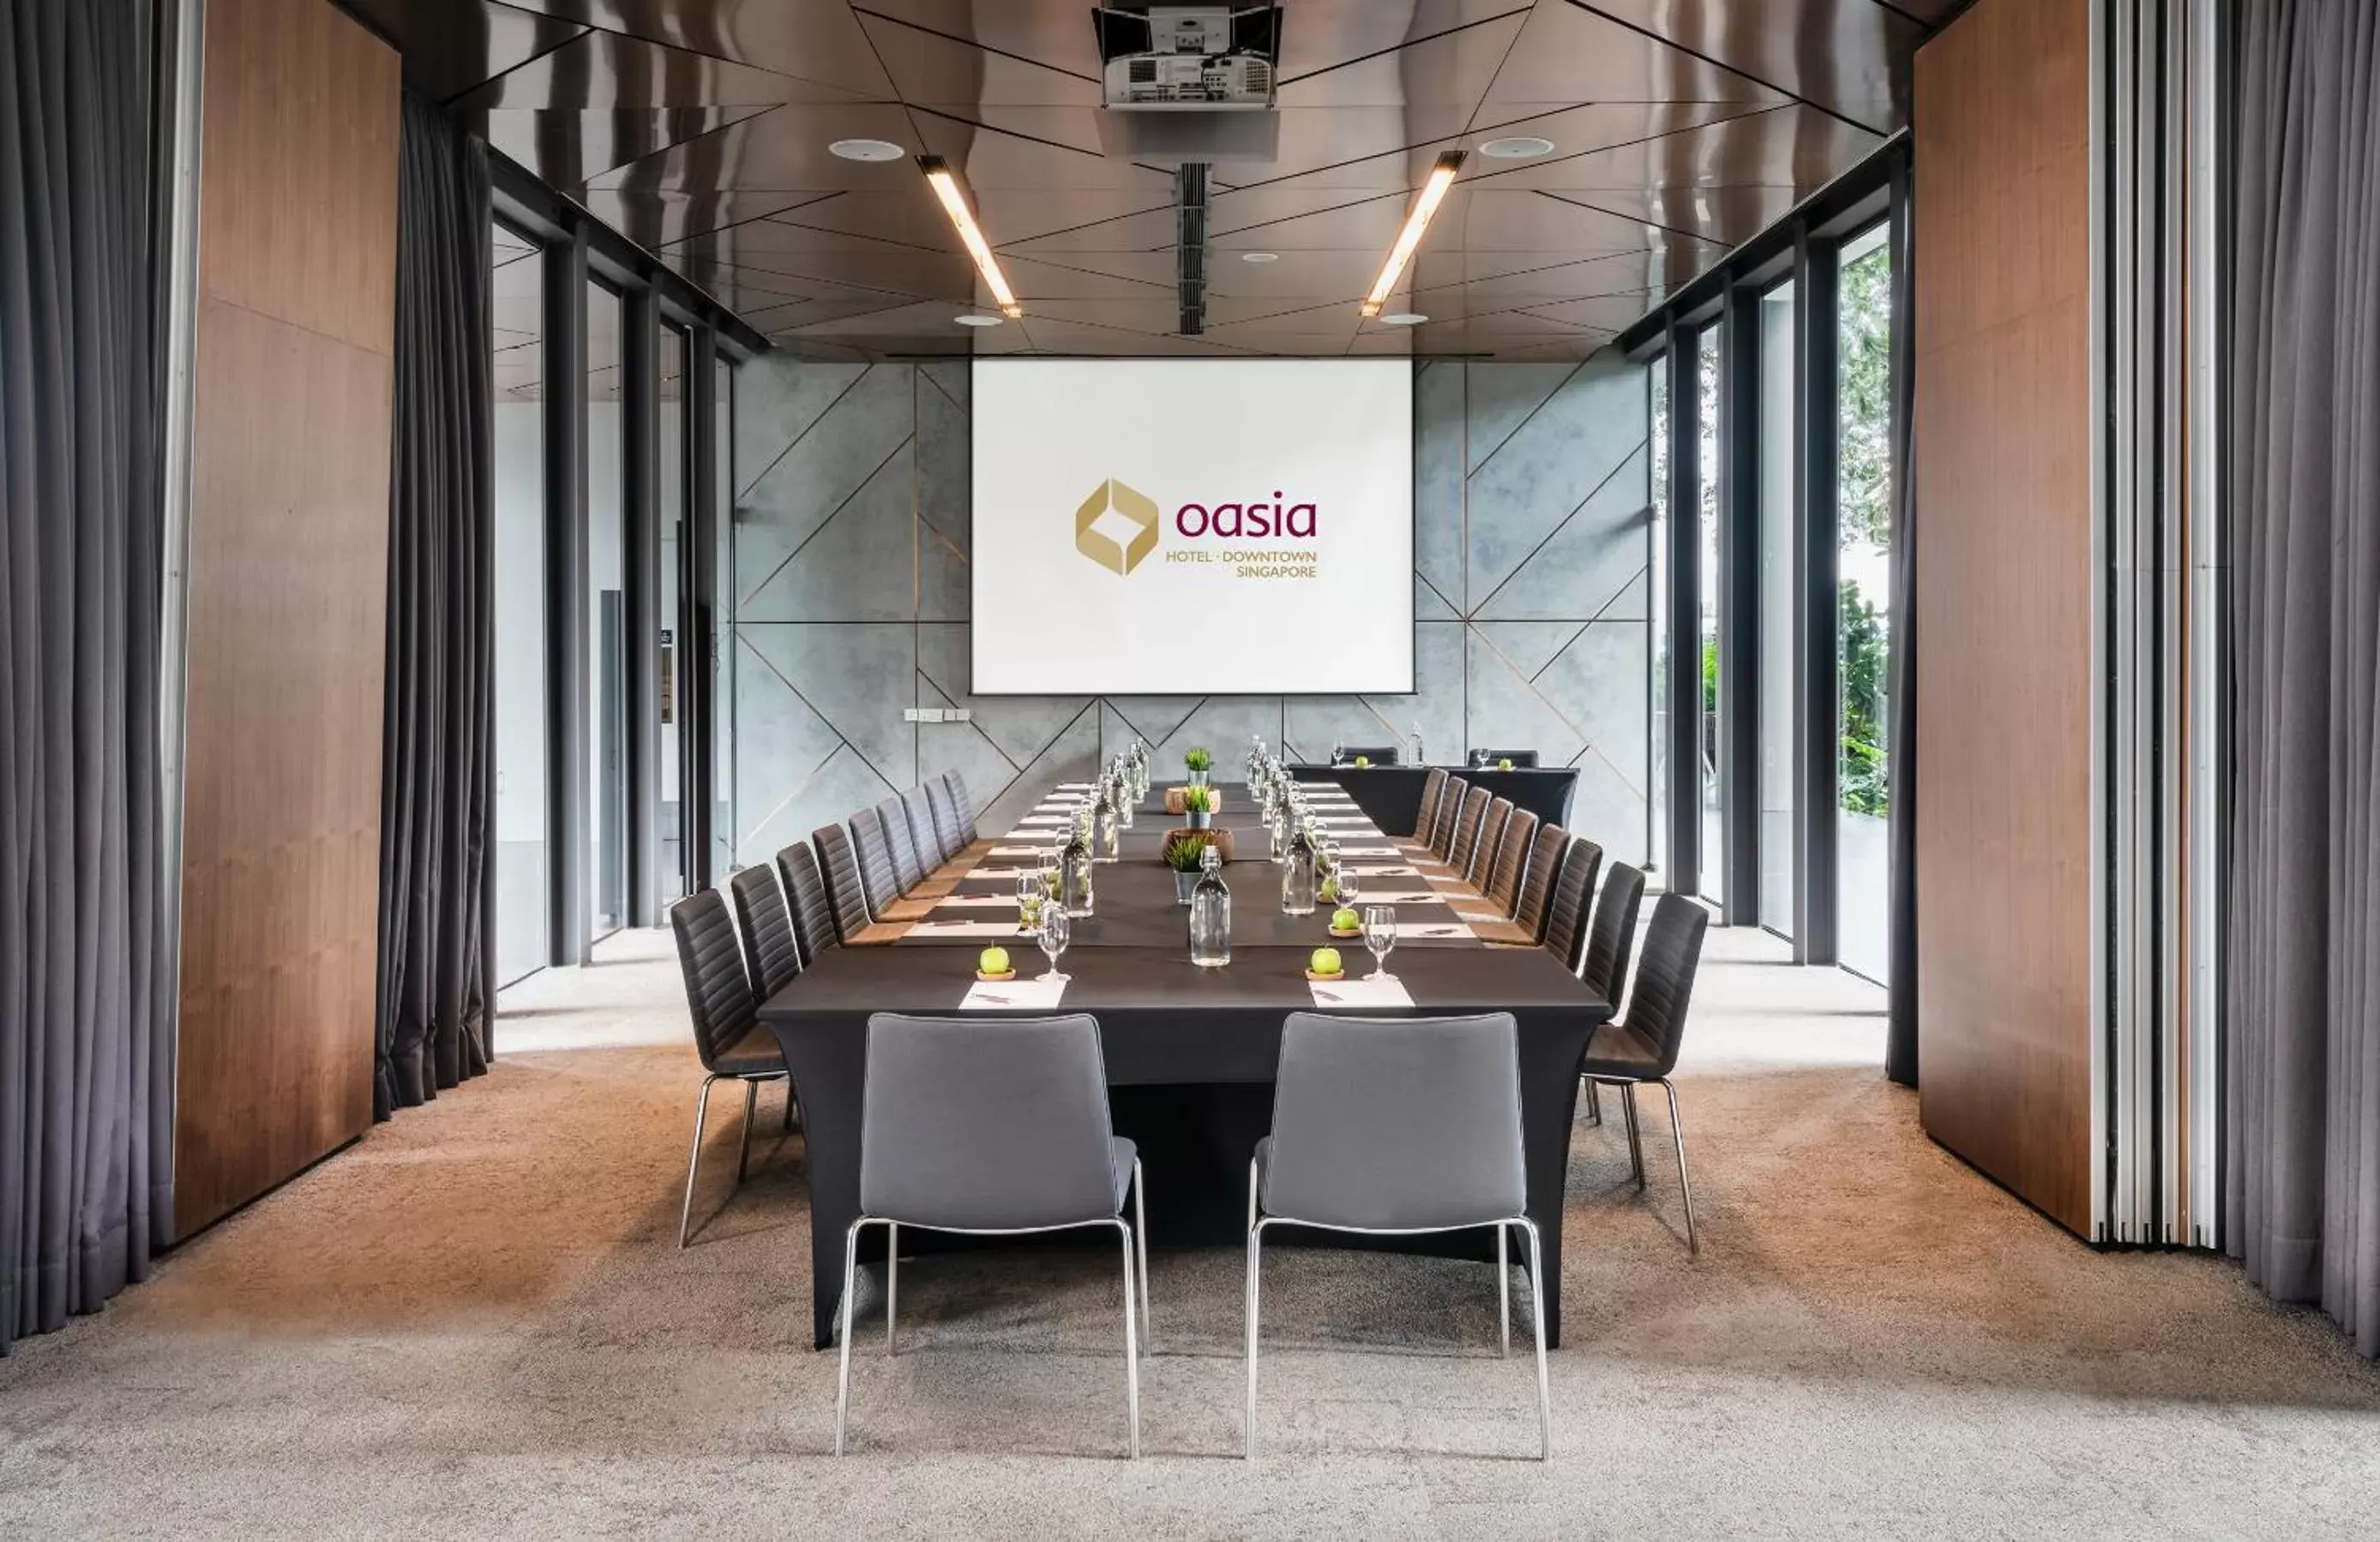 Business facilities in Oasia Hotel Downtown, Singapore by Far East Hospitality